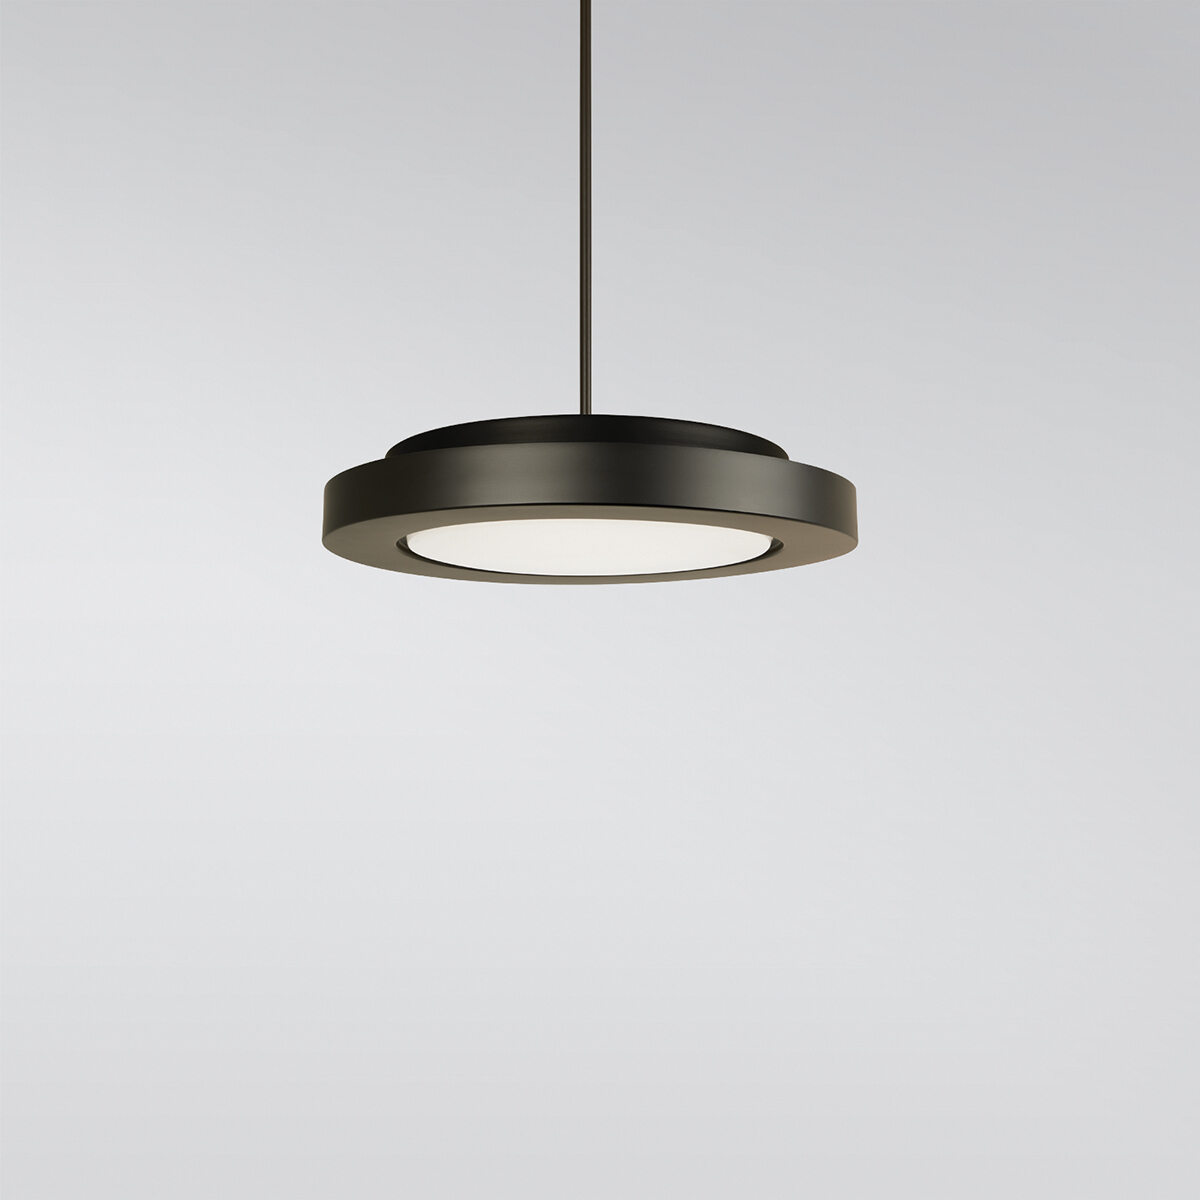 A circular pendant with a thick outer band, suspended by a stem